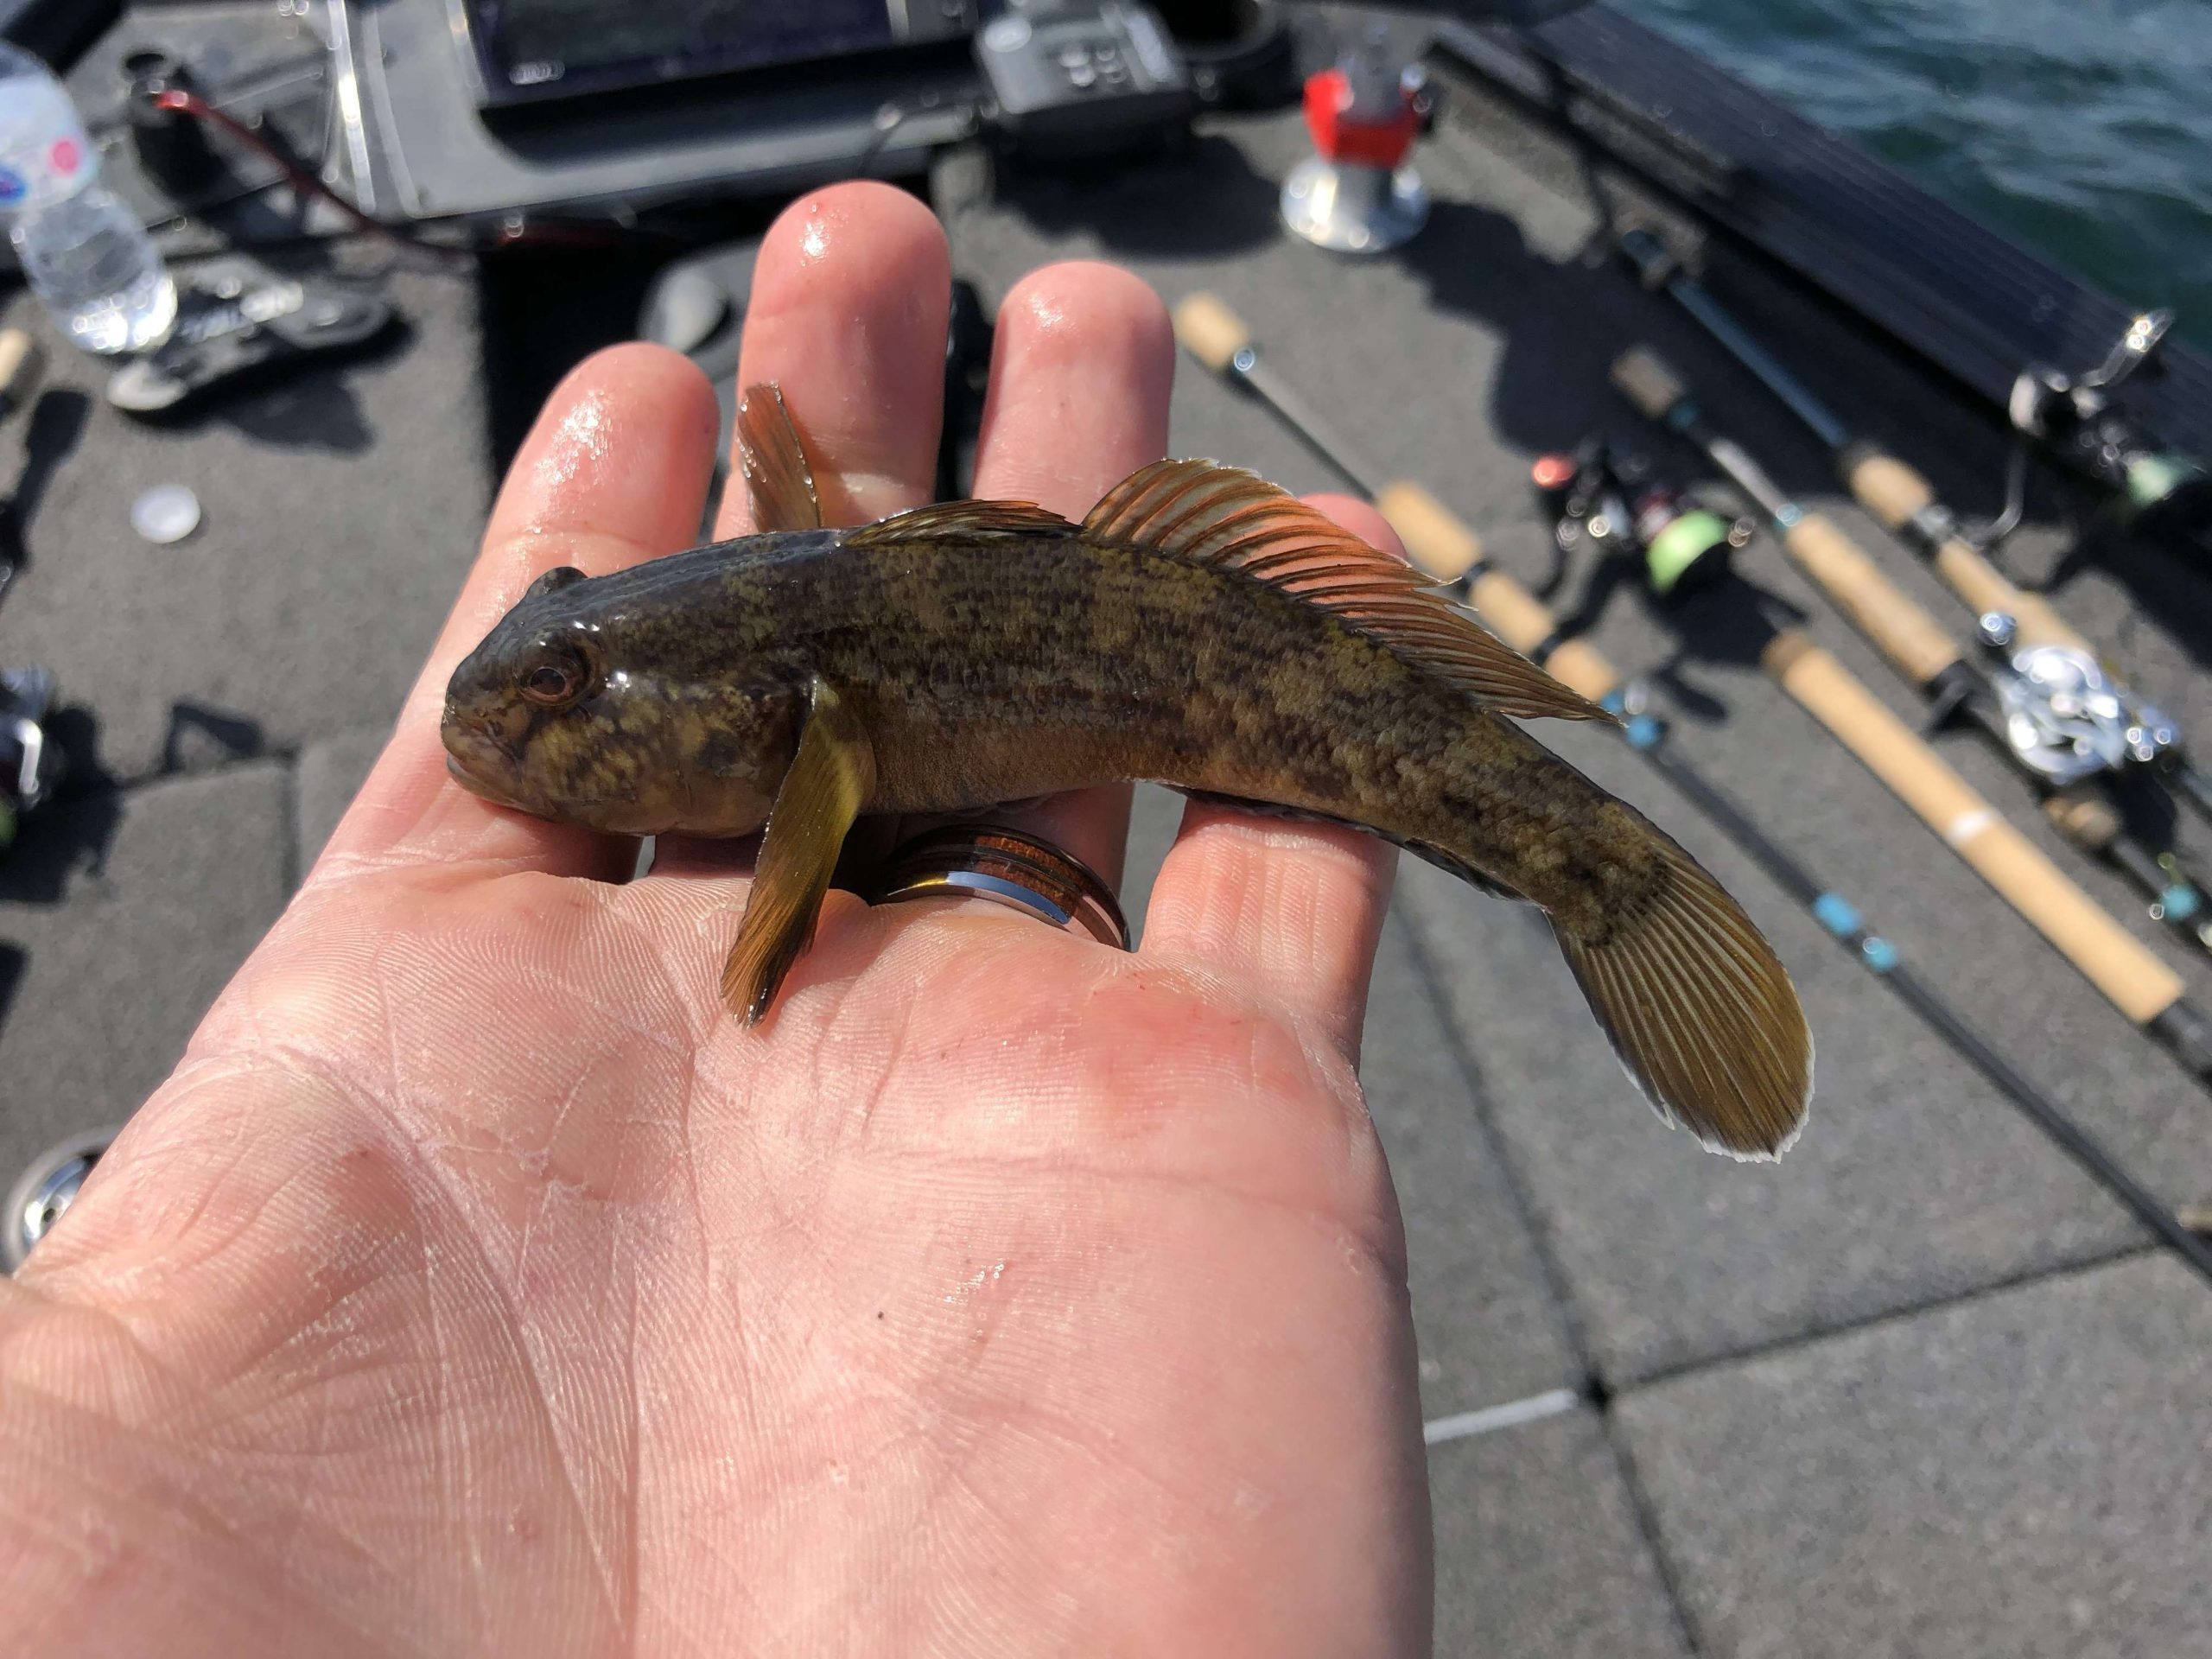 Goby are a forage of smallmouth, and their introduction has helped the smallies increase in size. Baits mimicking the tasty morsels will be abundant.